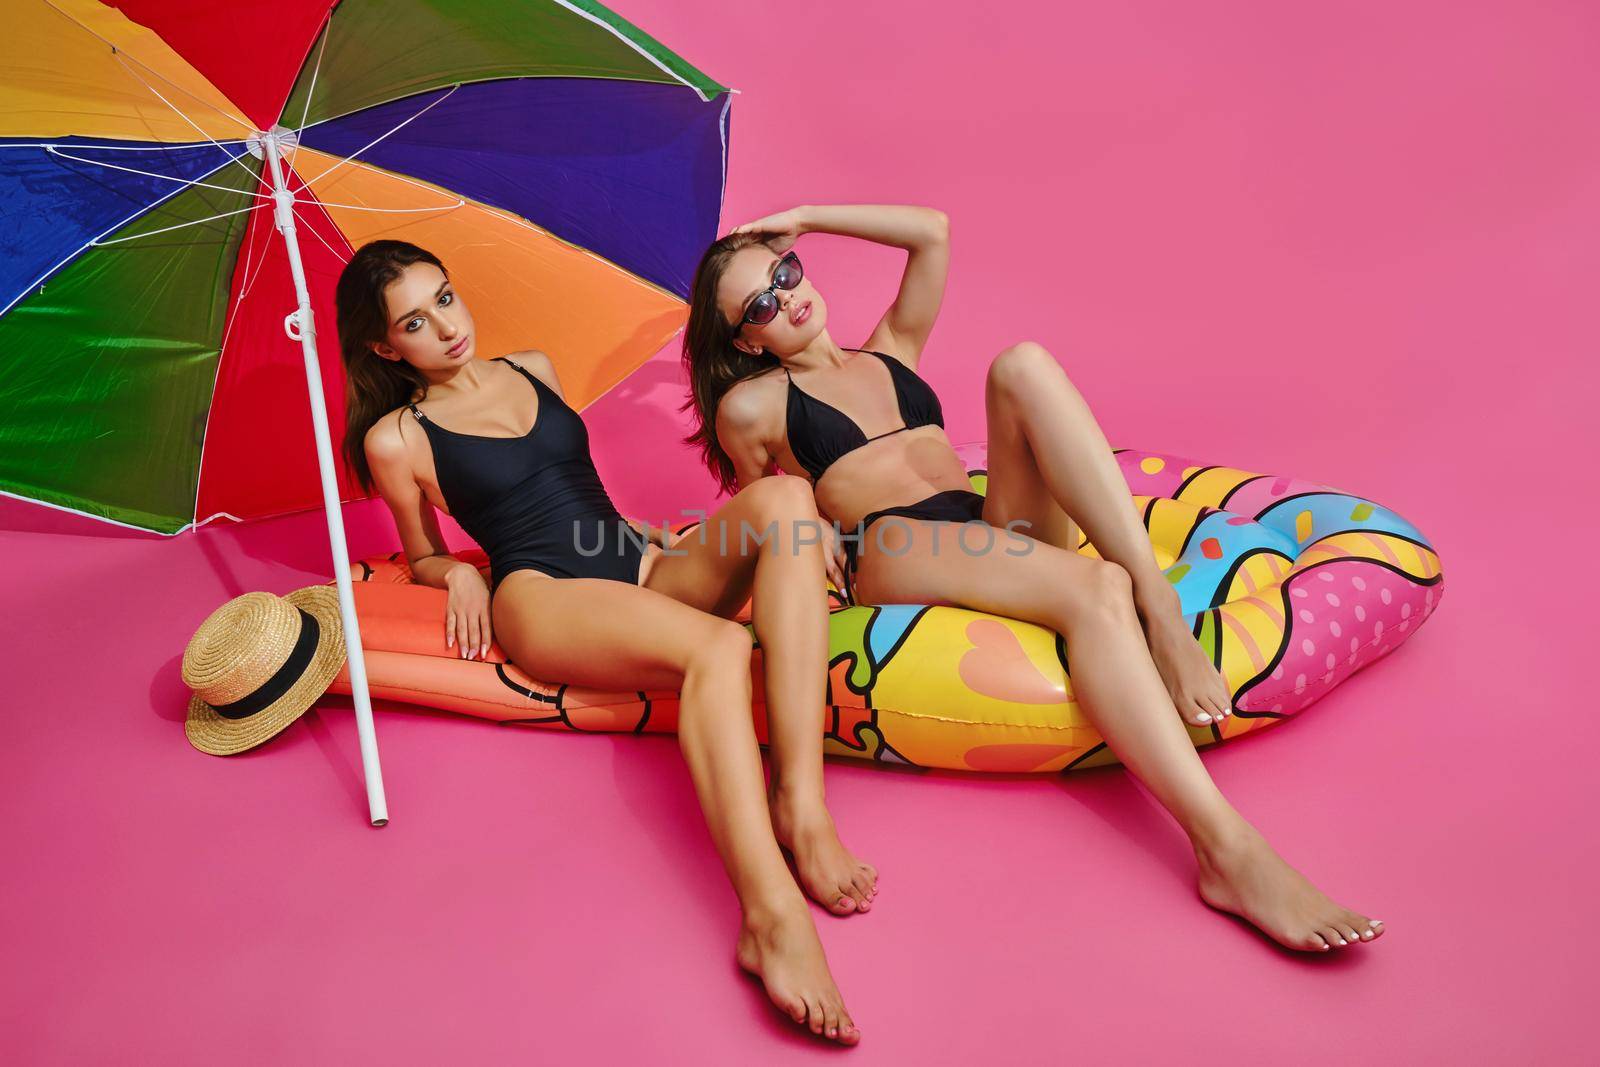 Two attractive carefree girls wearing black bathing suits sitting on colorful air floating mattress under large sun umbrella. Dreams of beach vacation concept. Studio portrait on pink background